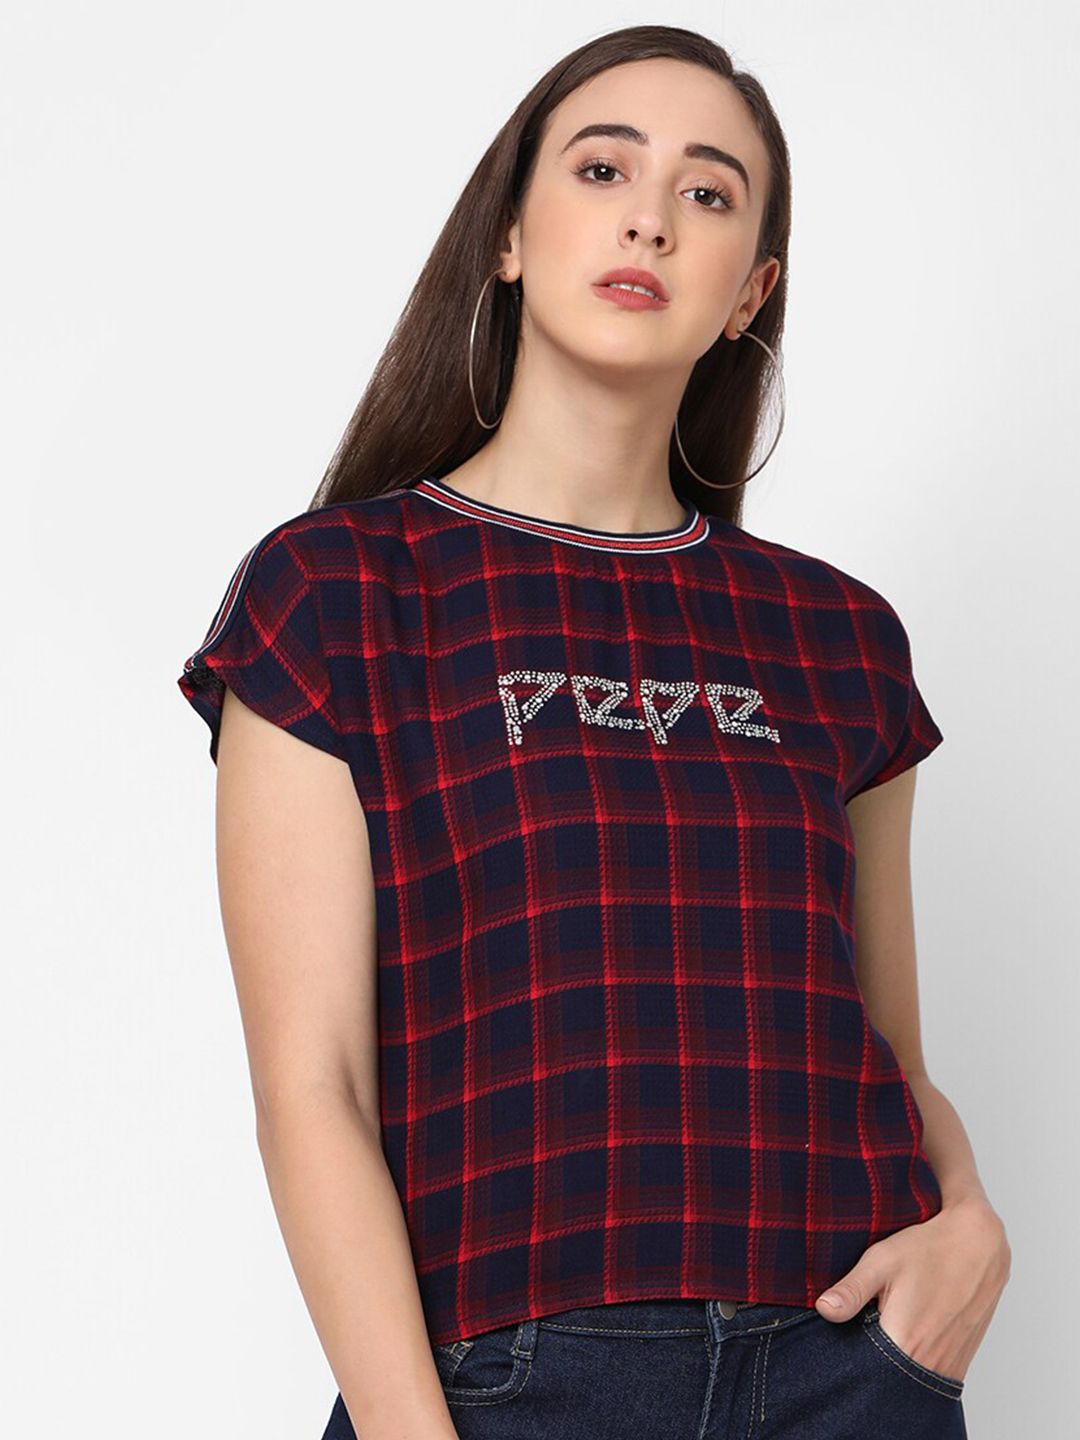 Pepe Jeans Navy Blue & Red Checked Extended Sleeves Top Price in India